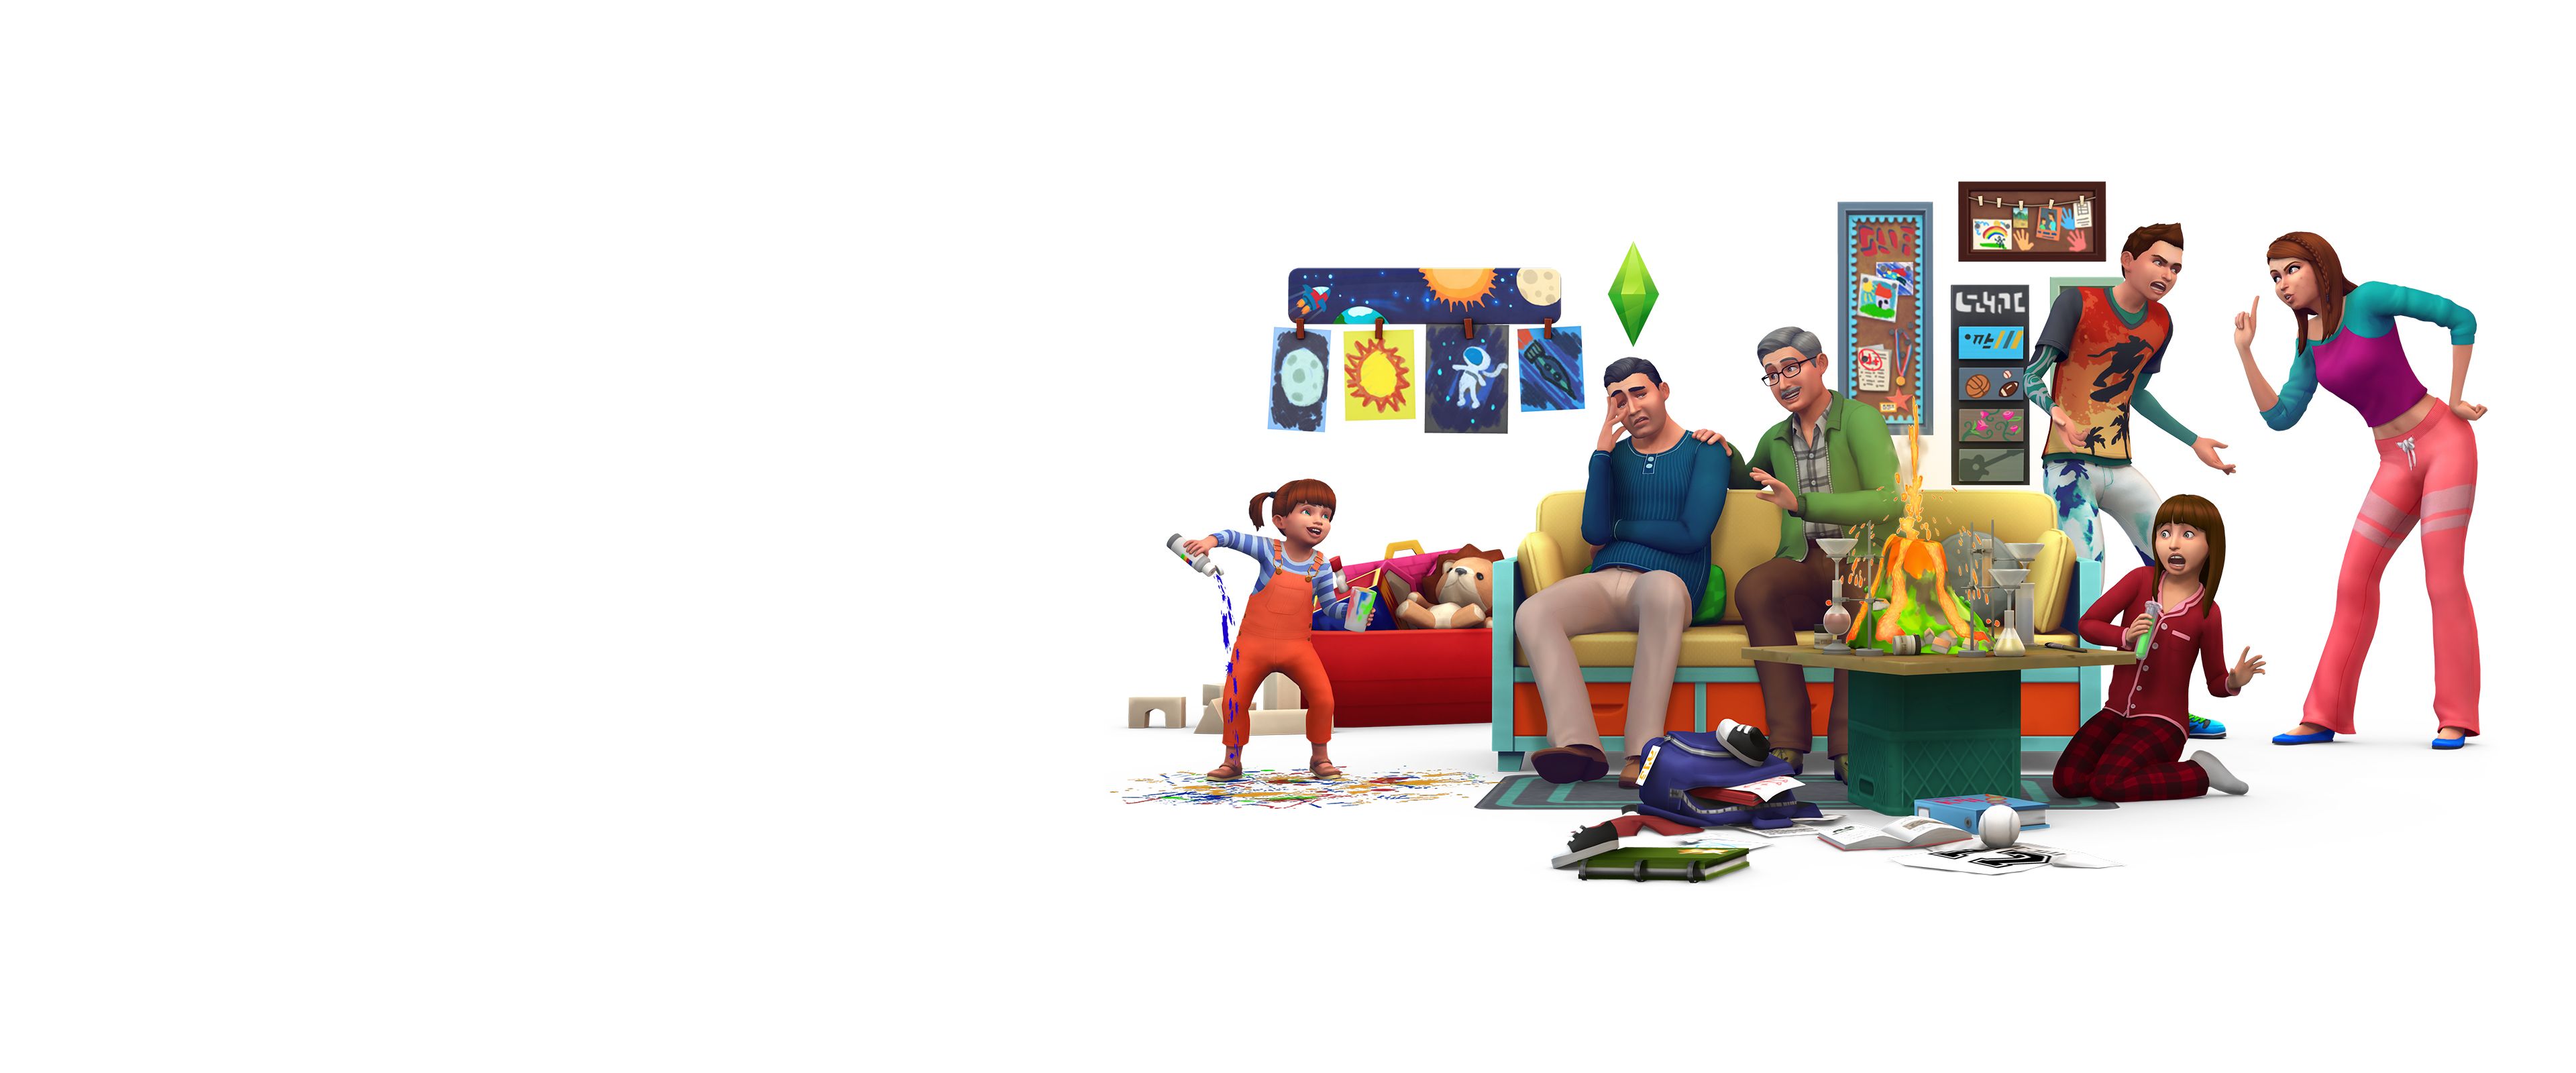 the sims 4 macbook download free